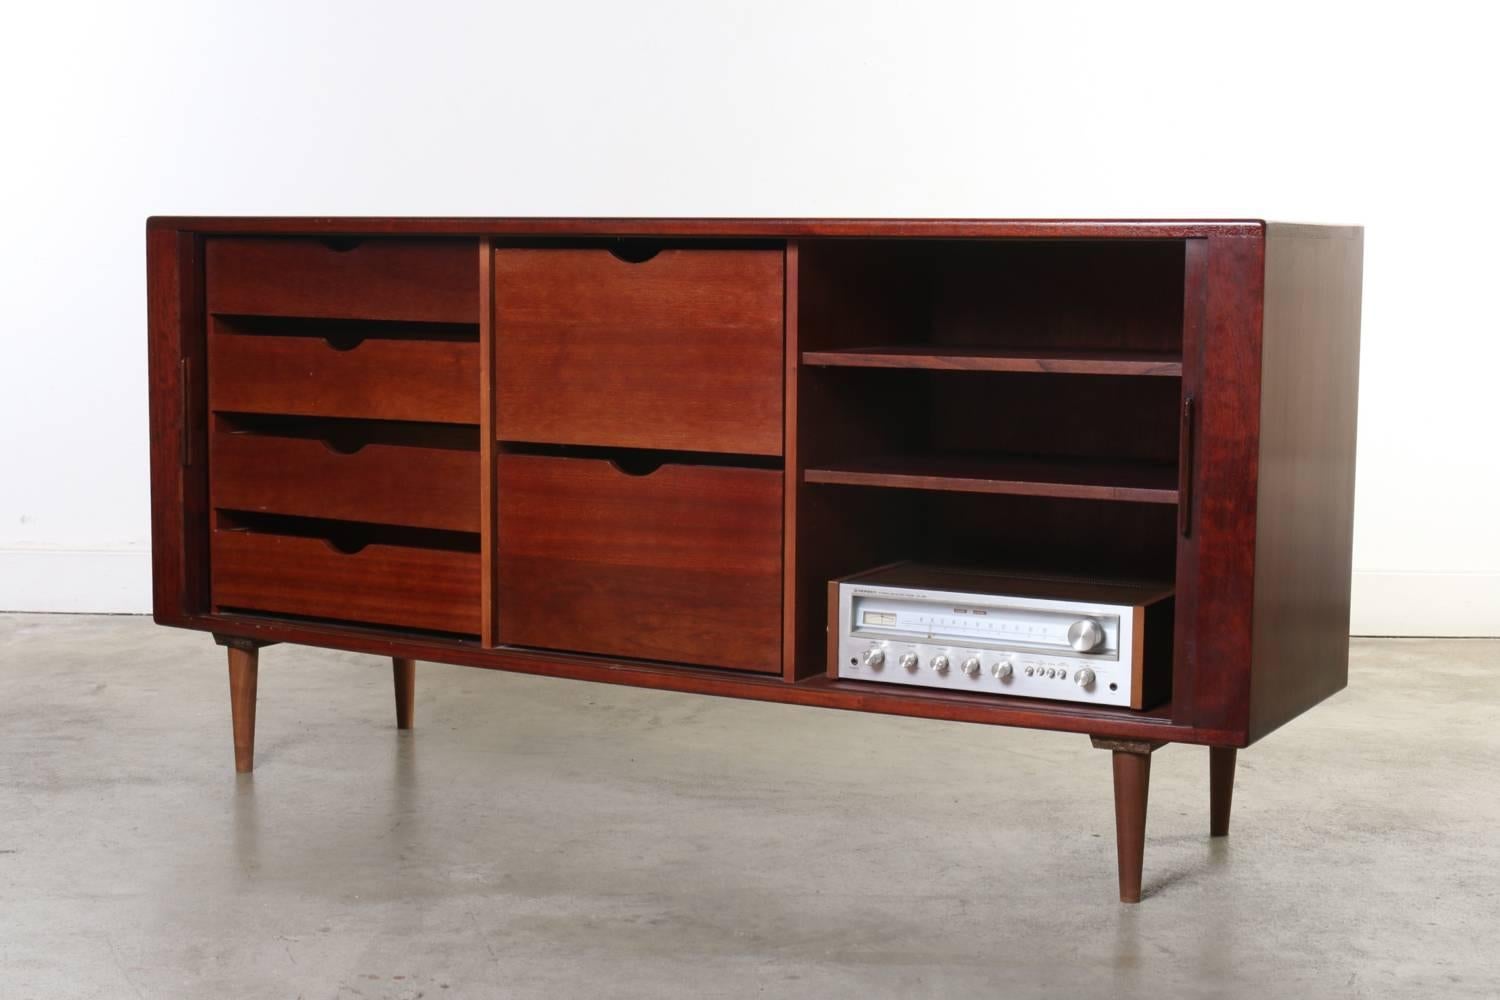 This rosewood credenza is clearly stamped on the back made in Denmark by H. P. Hansen, it features sliding tambour doors, interior shelves, four storage drawers and two file drawers. Great for home or office. This beauty is in excellent original